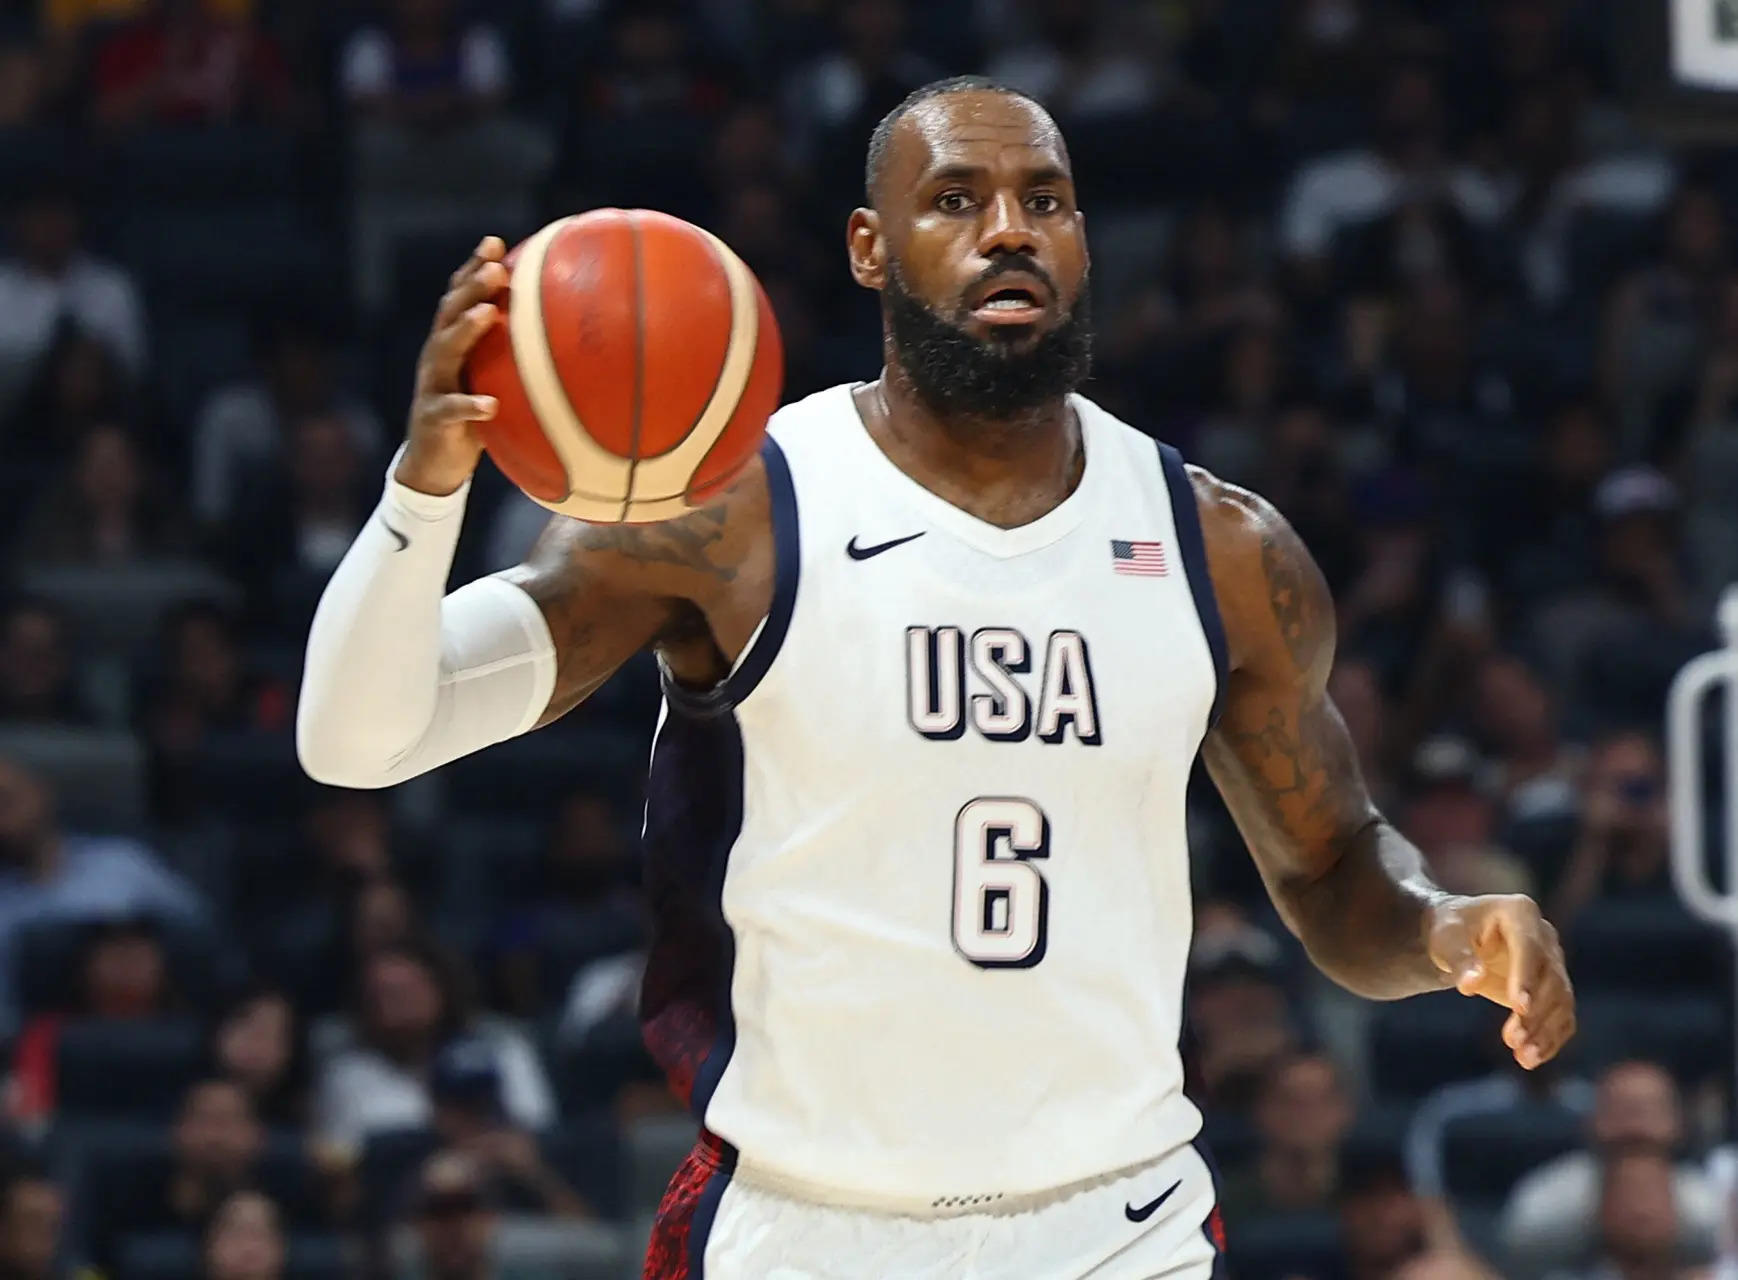 Top medal contenders for men's basketball event, who can beat Team USA at Paris Olympics? 